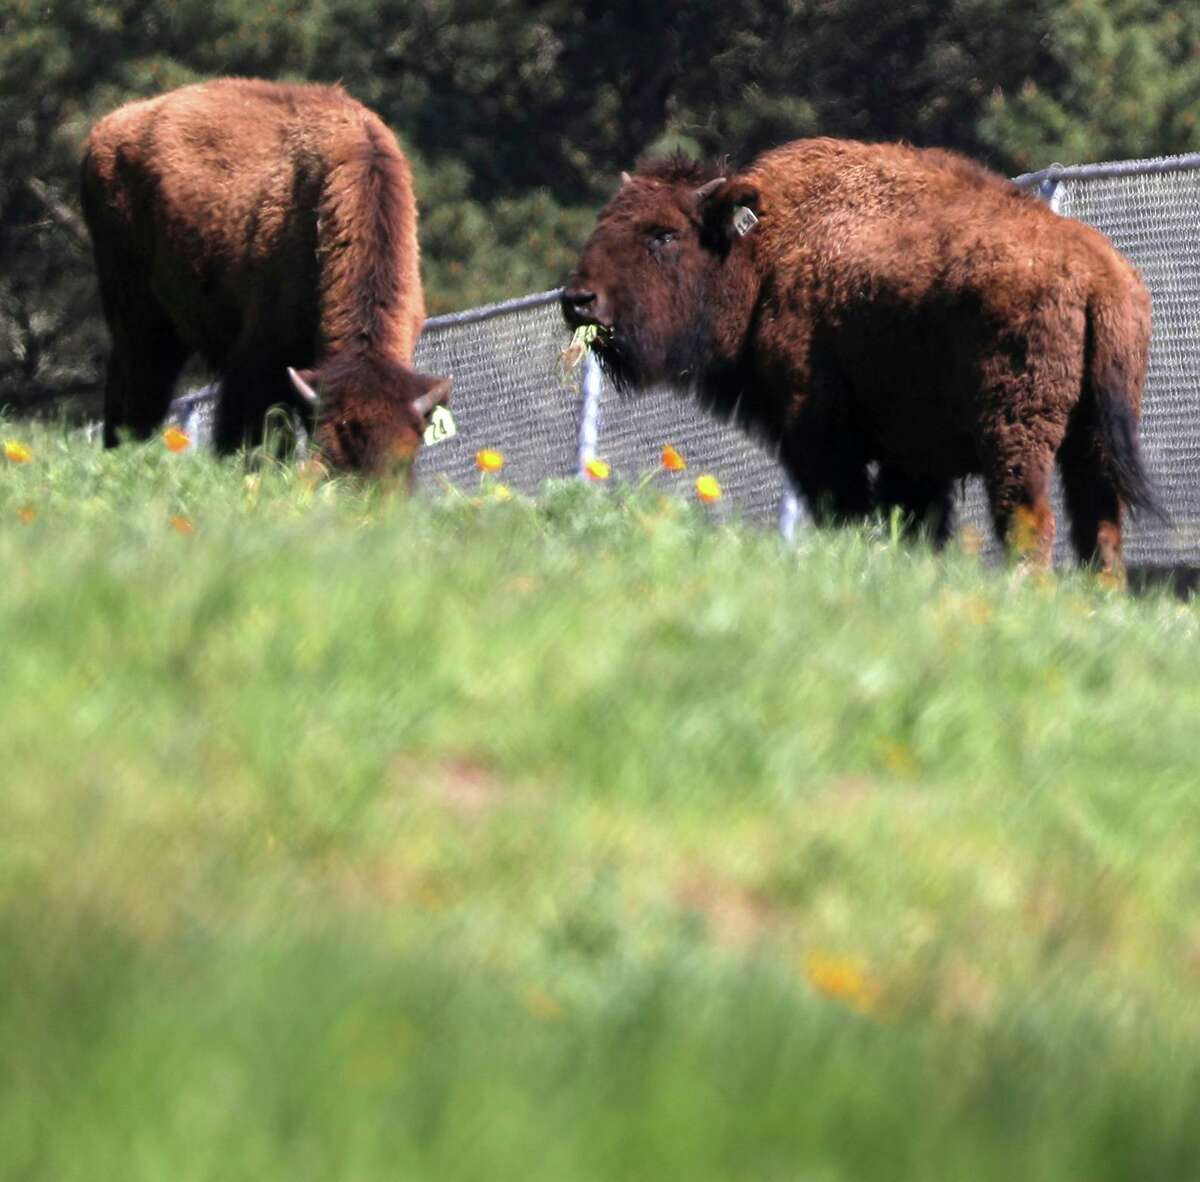 New additions to Golden Gate Park’s bison herd chomp on the bounty of their new San Francisco residence.